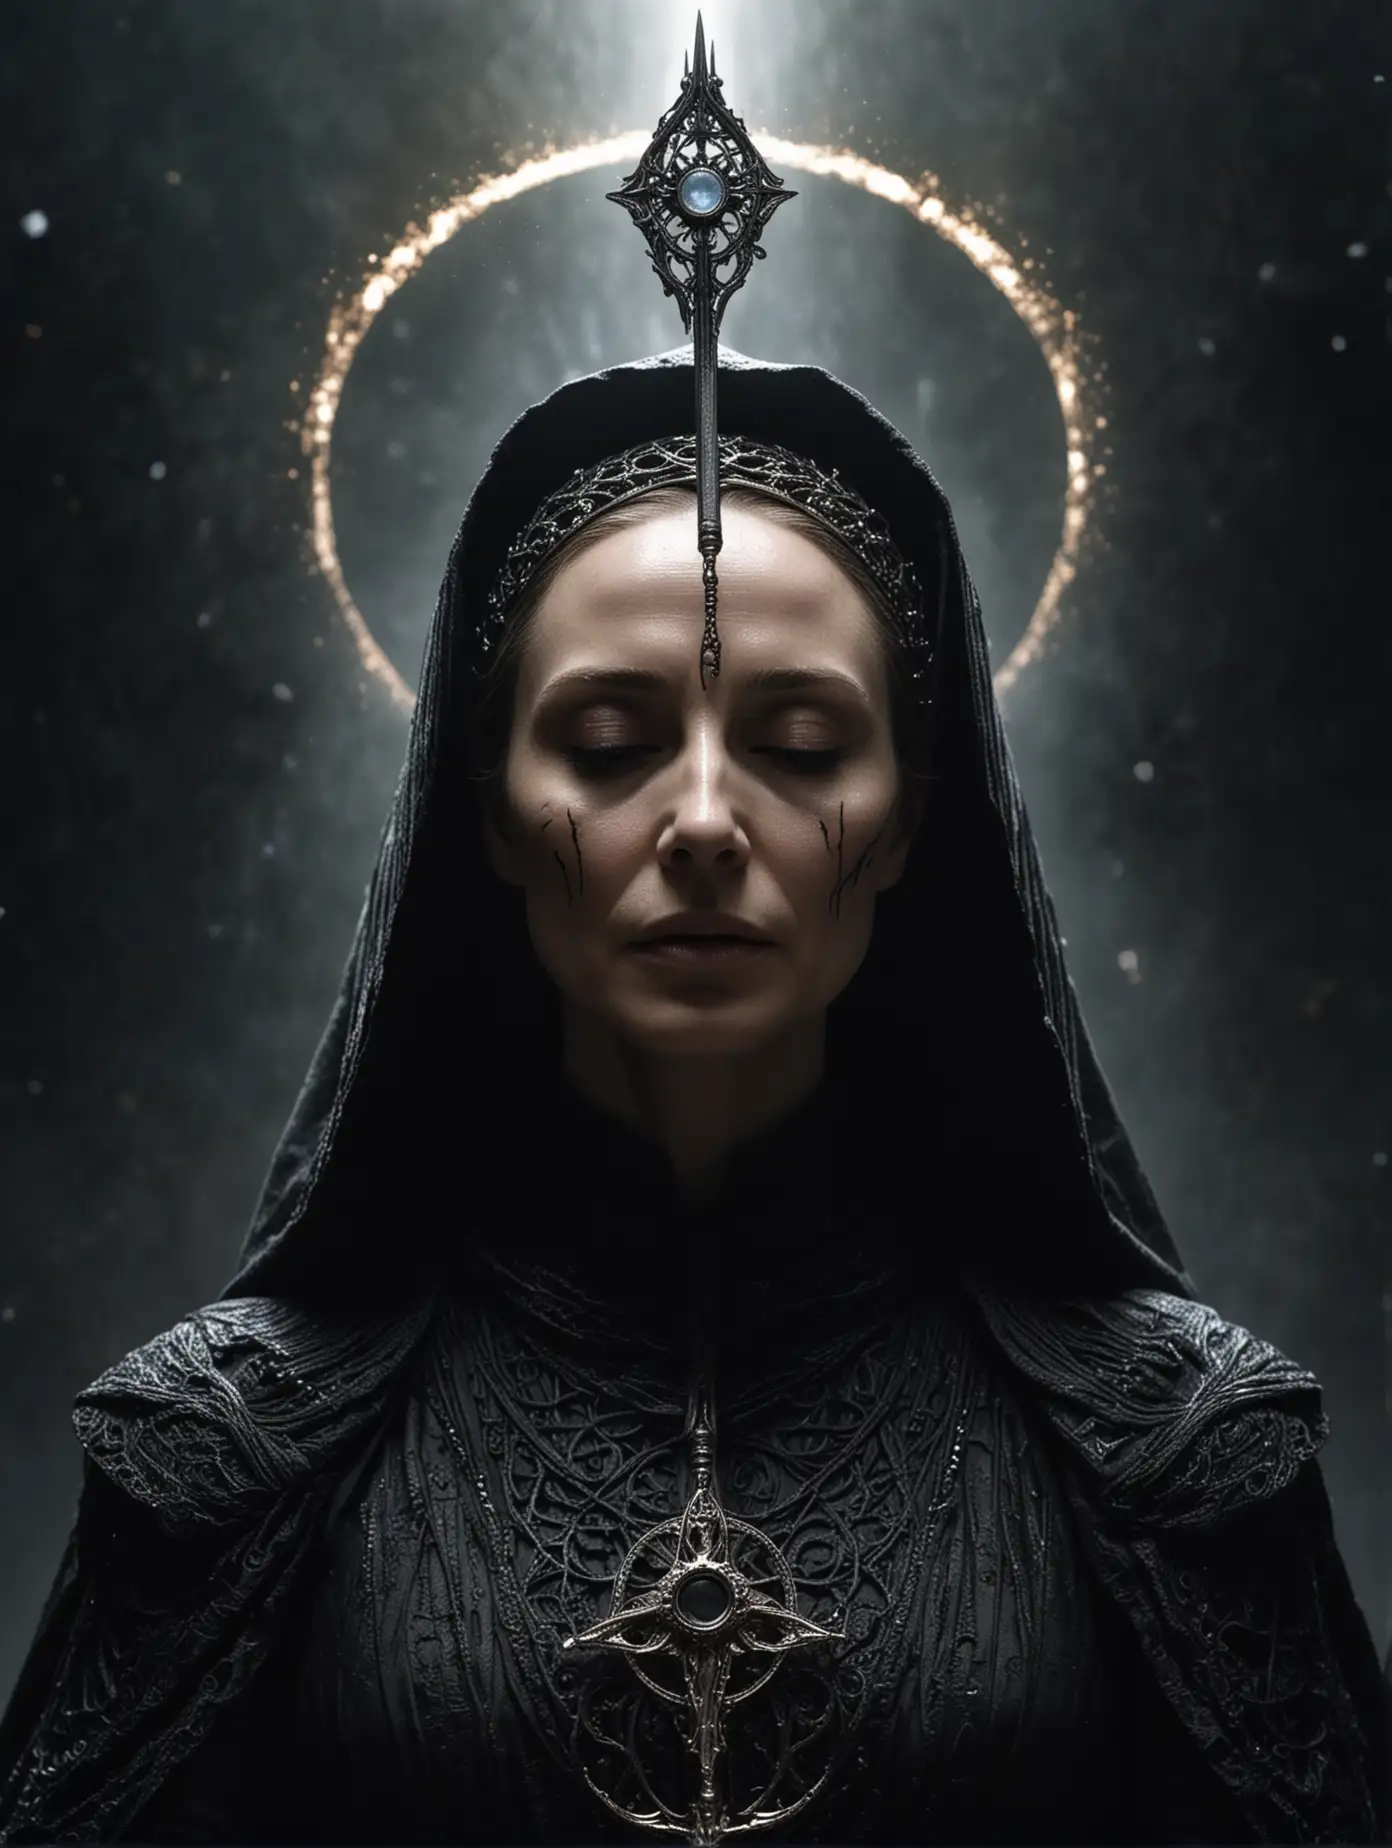 Mystical-Bene-Gesserit-Sister-with-Halo-Crown-and-Black-Sword-in-Space